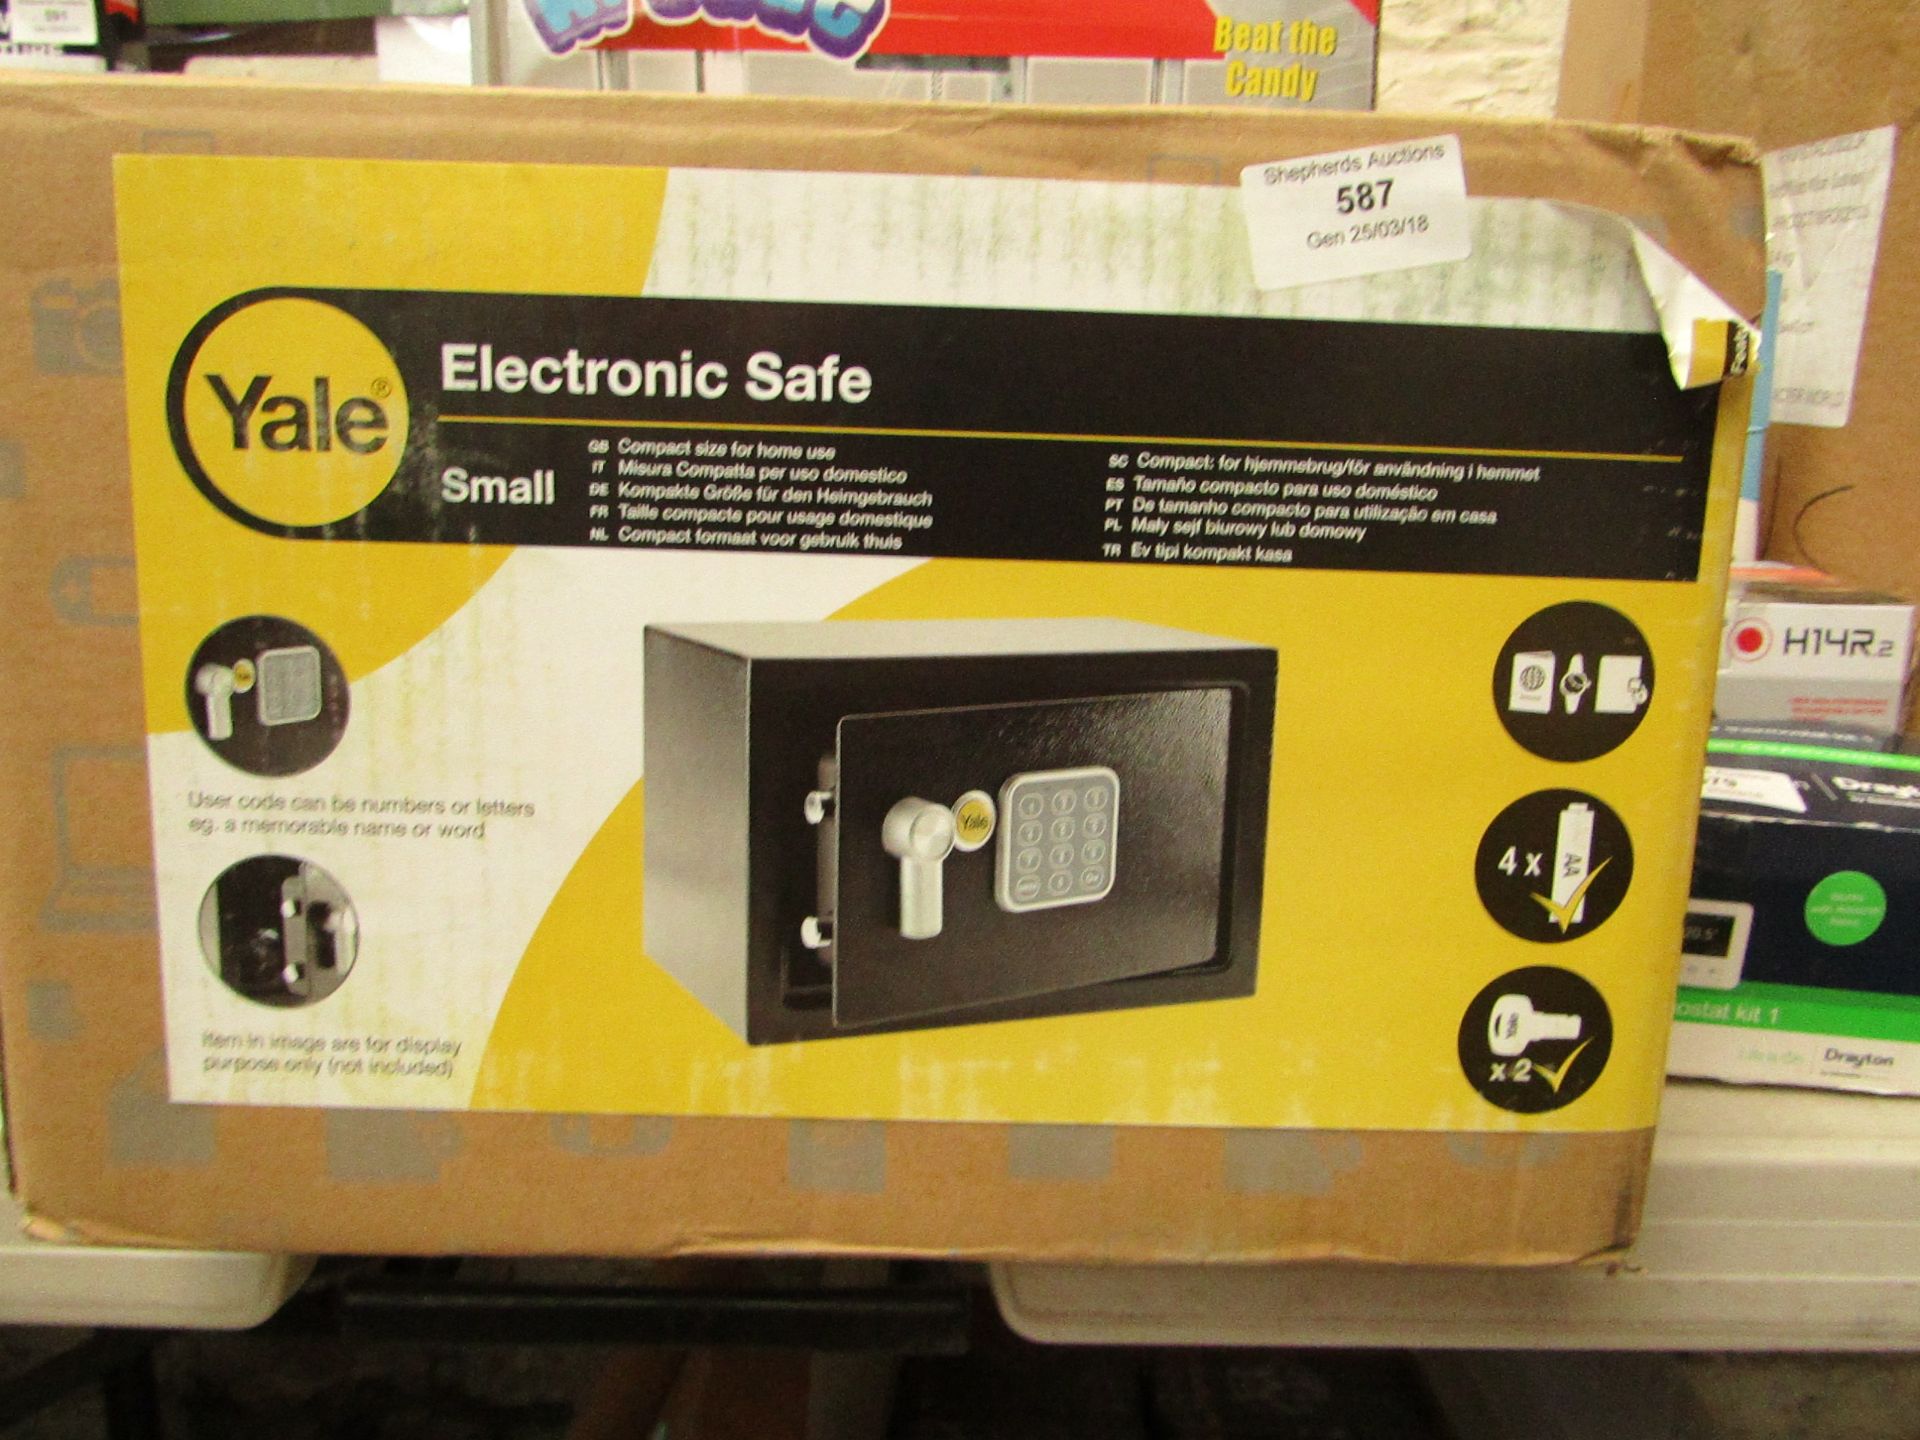 Yale electronic safe - small, unchecked and boxed.